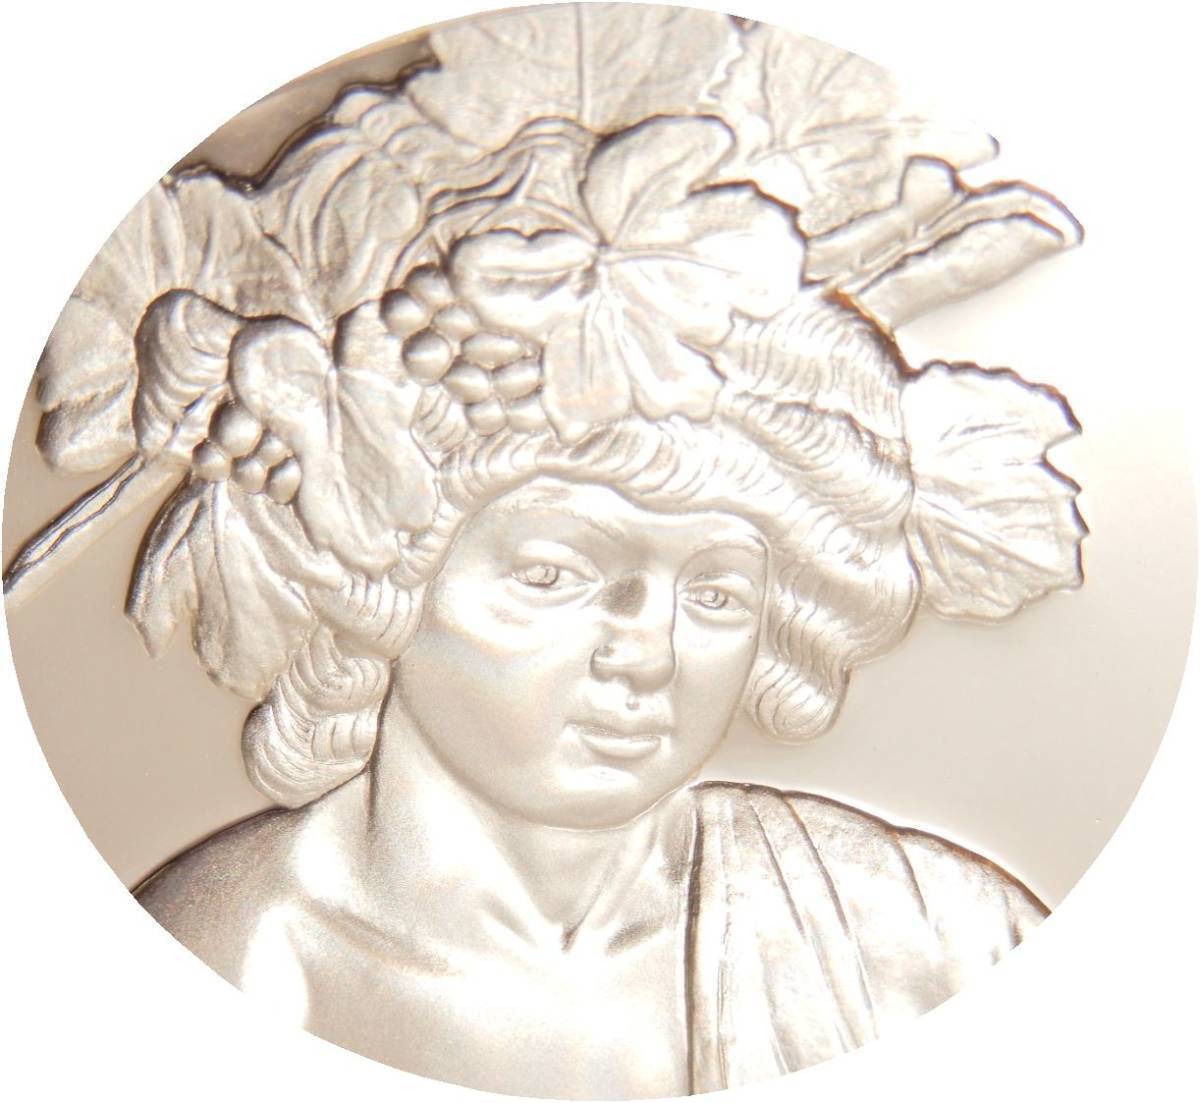 Limited item, extremely beautiful item, made by the French Mint, certified by the Ministry of Finance, artist painting, grape leaf, ancient Greece, Bacchus, sterling silver, souvenir, commemorative medal, tile, insignia, coin, metal crafts, made of silver, others